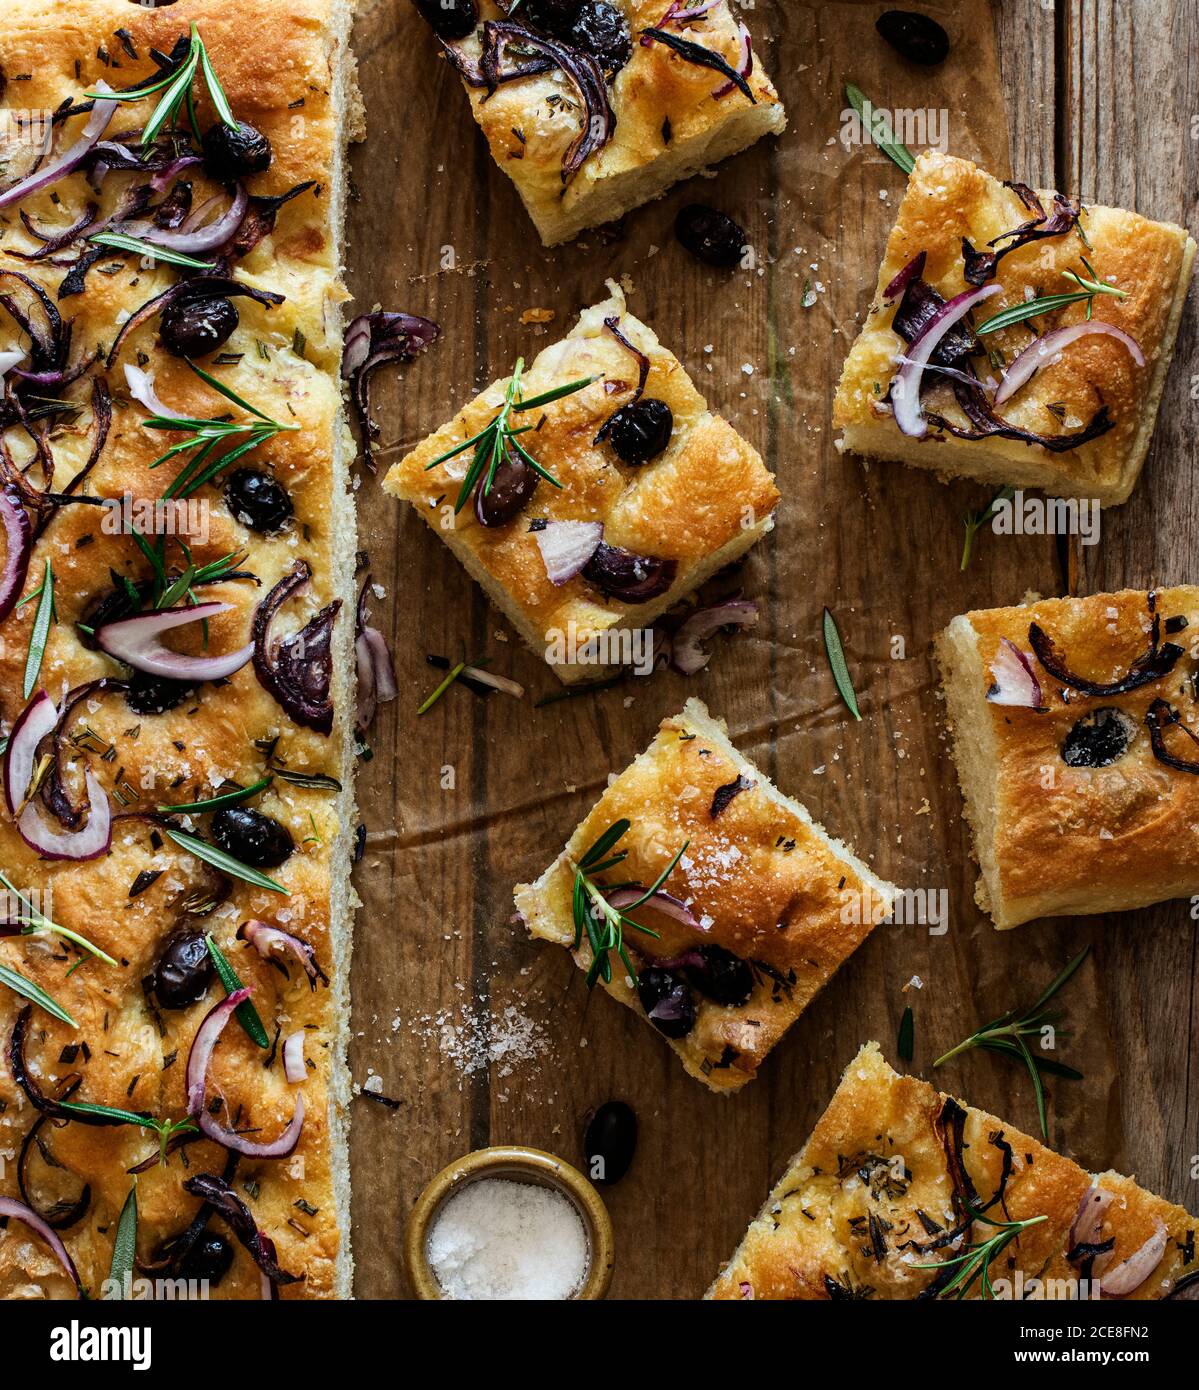 Focaccia with black olives and herbs on wooden table Stock Photo